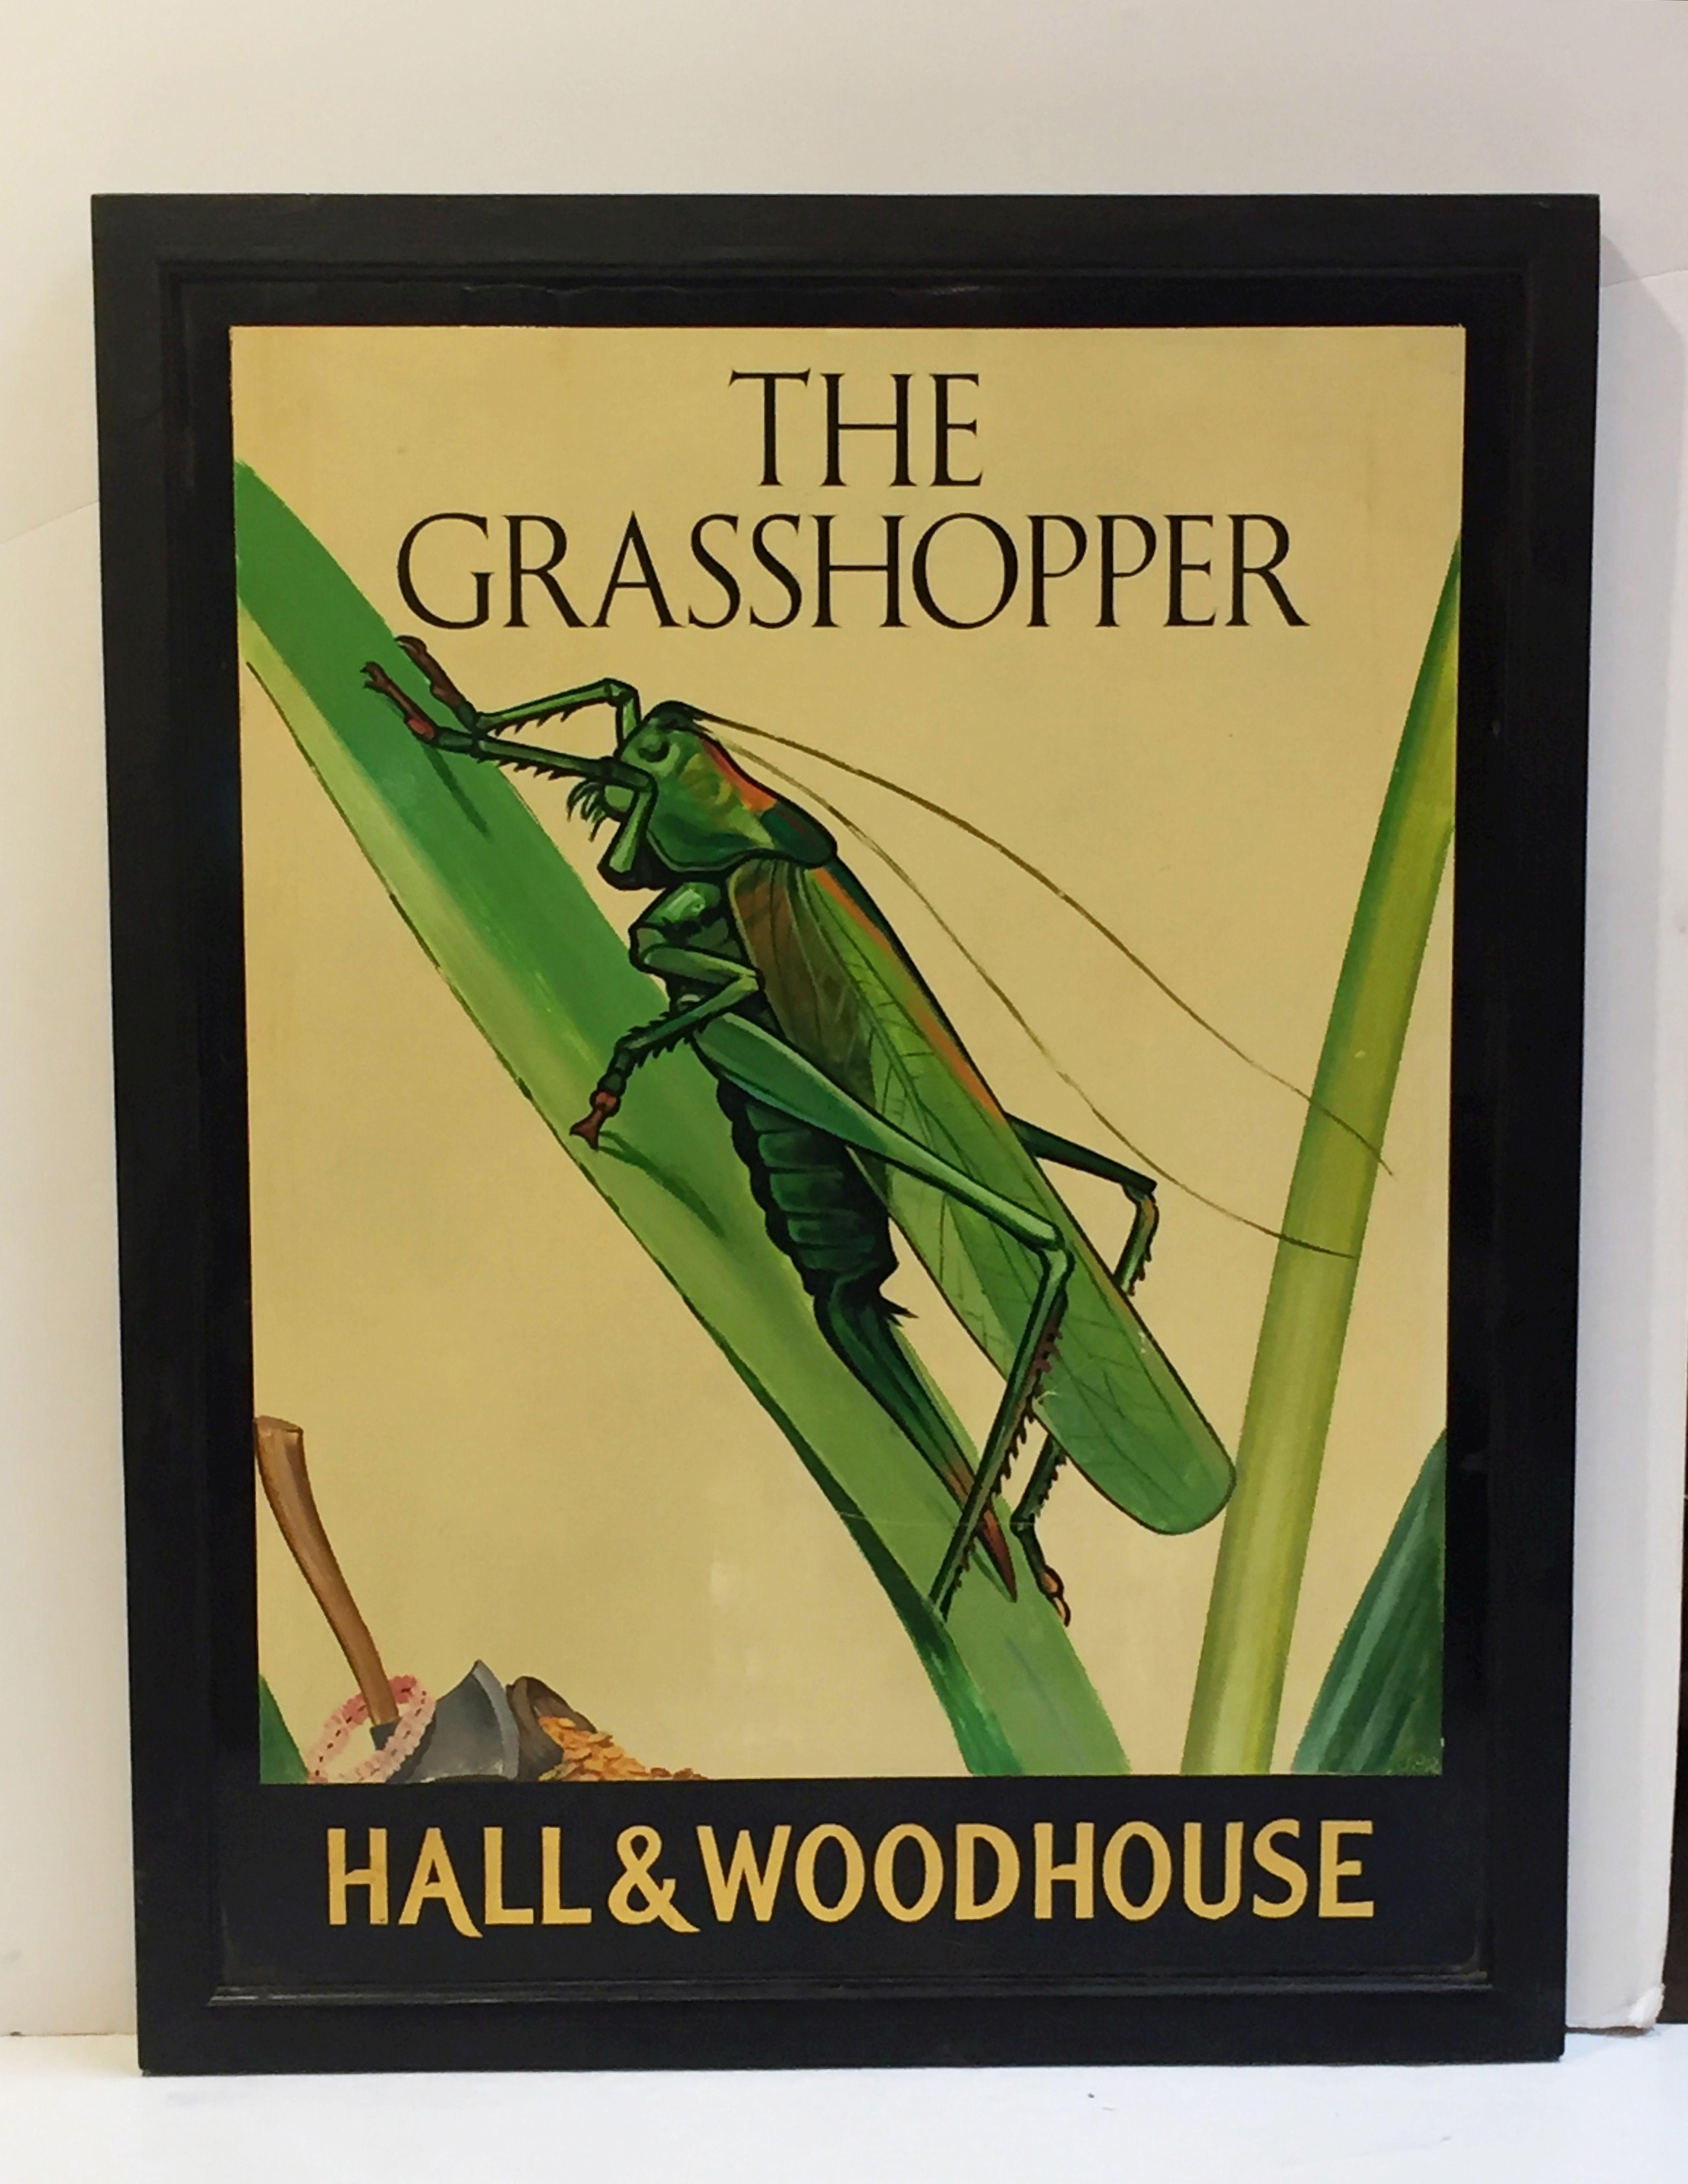 An authentic English pub sign (one-sided) featuring a painting of a grasshopper on a blade of grass, entitled: The Grasshopper

Marked: Hall & Woodhouse

Hall and Woodhouse is a British regional brewery founded in 1777 by Charles Hall in